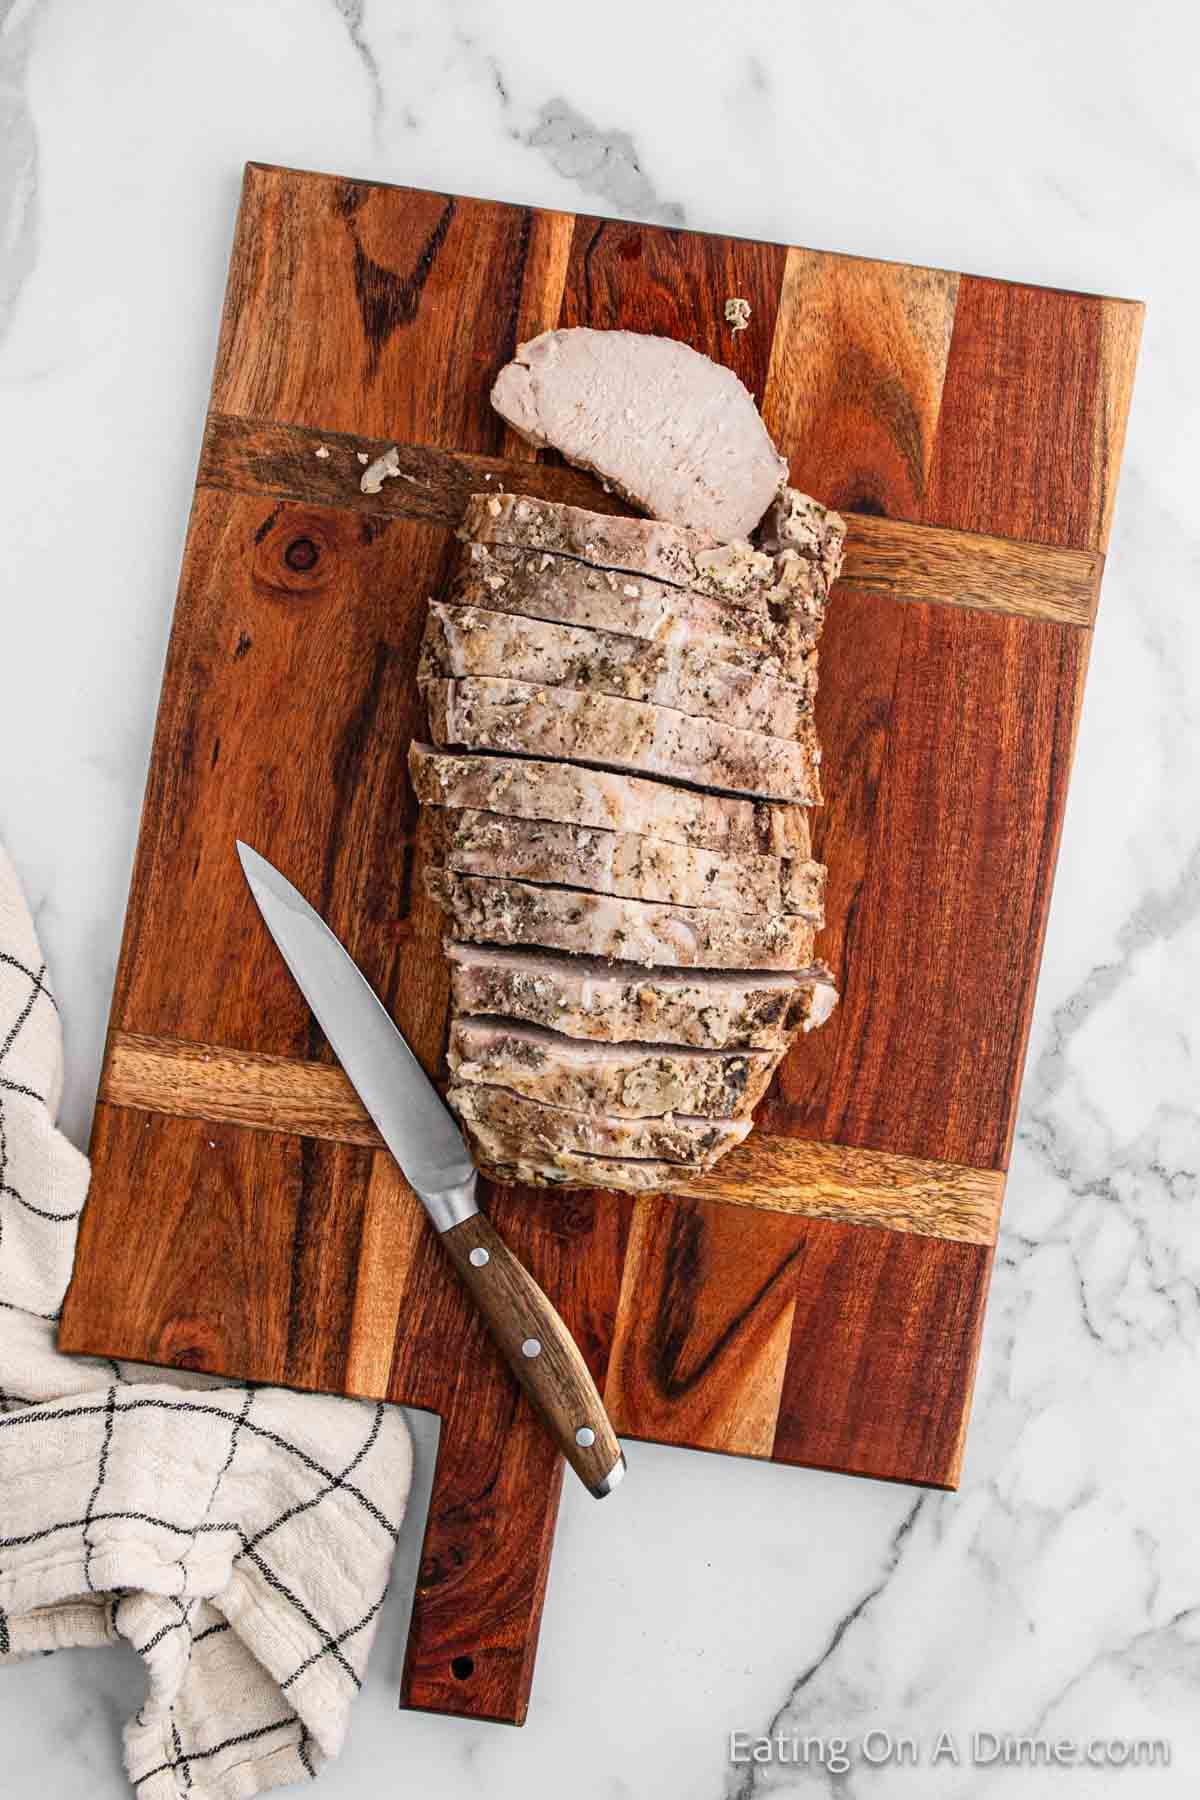 Slicing the pork loin on a cutting board with a knife